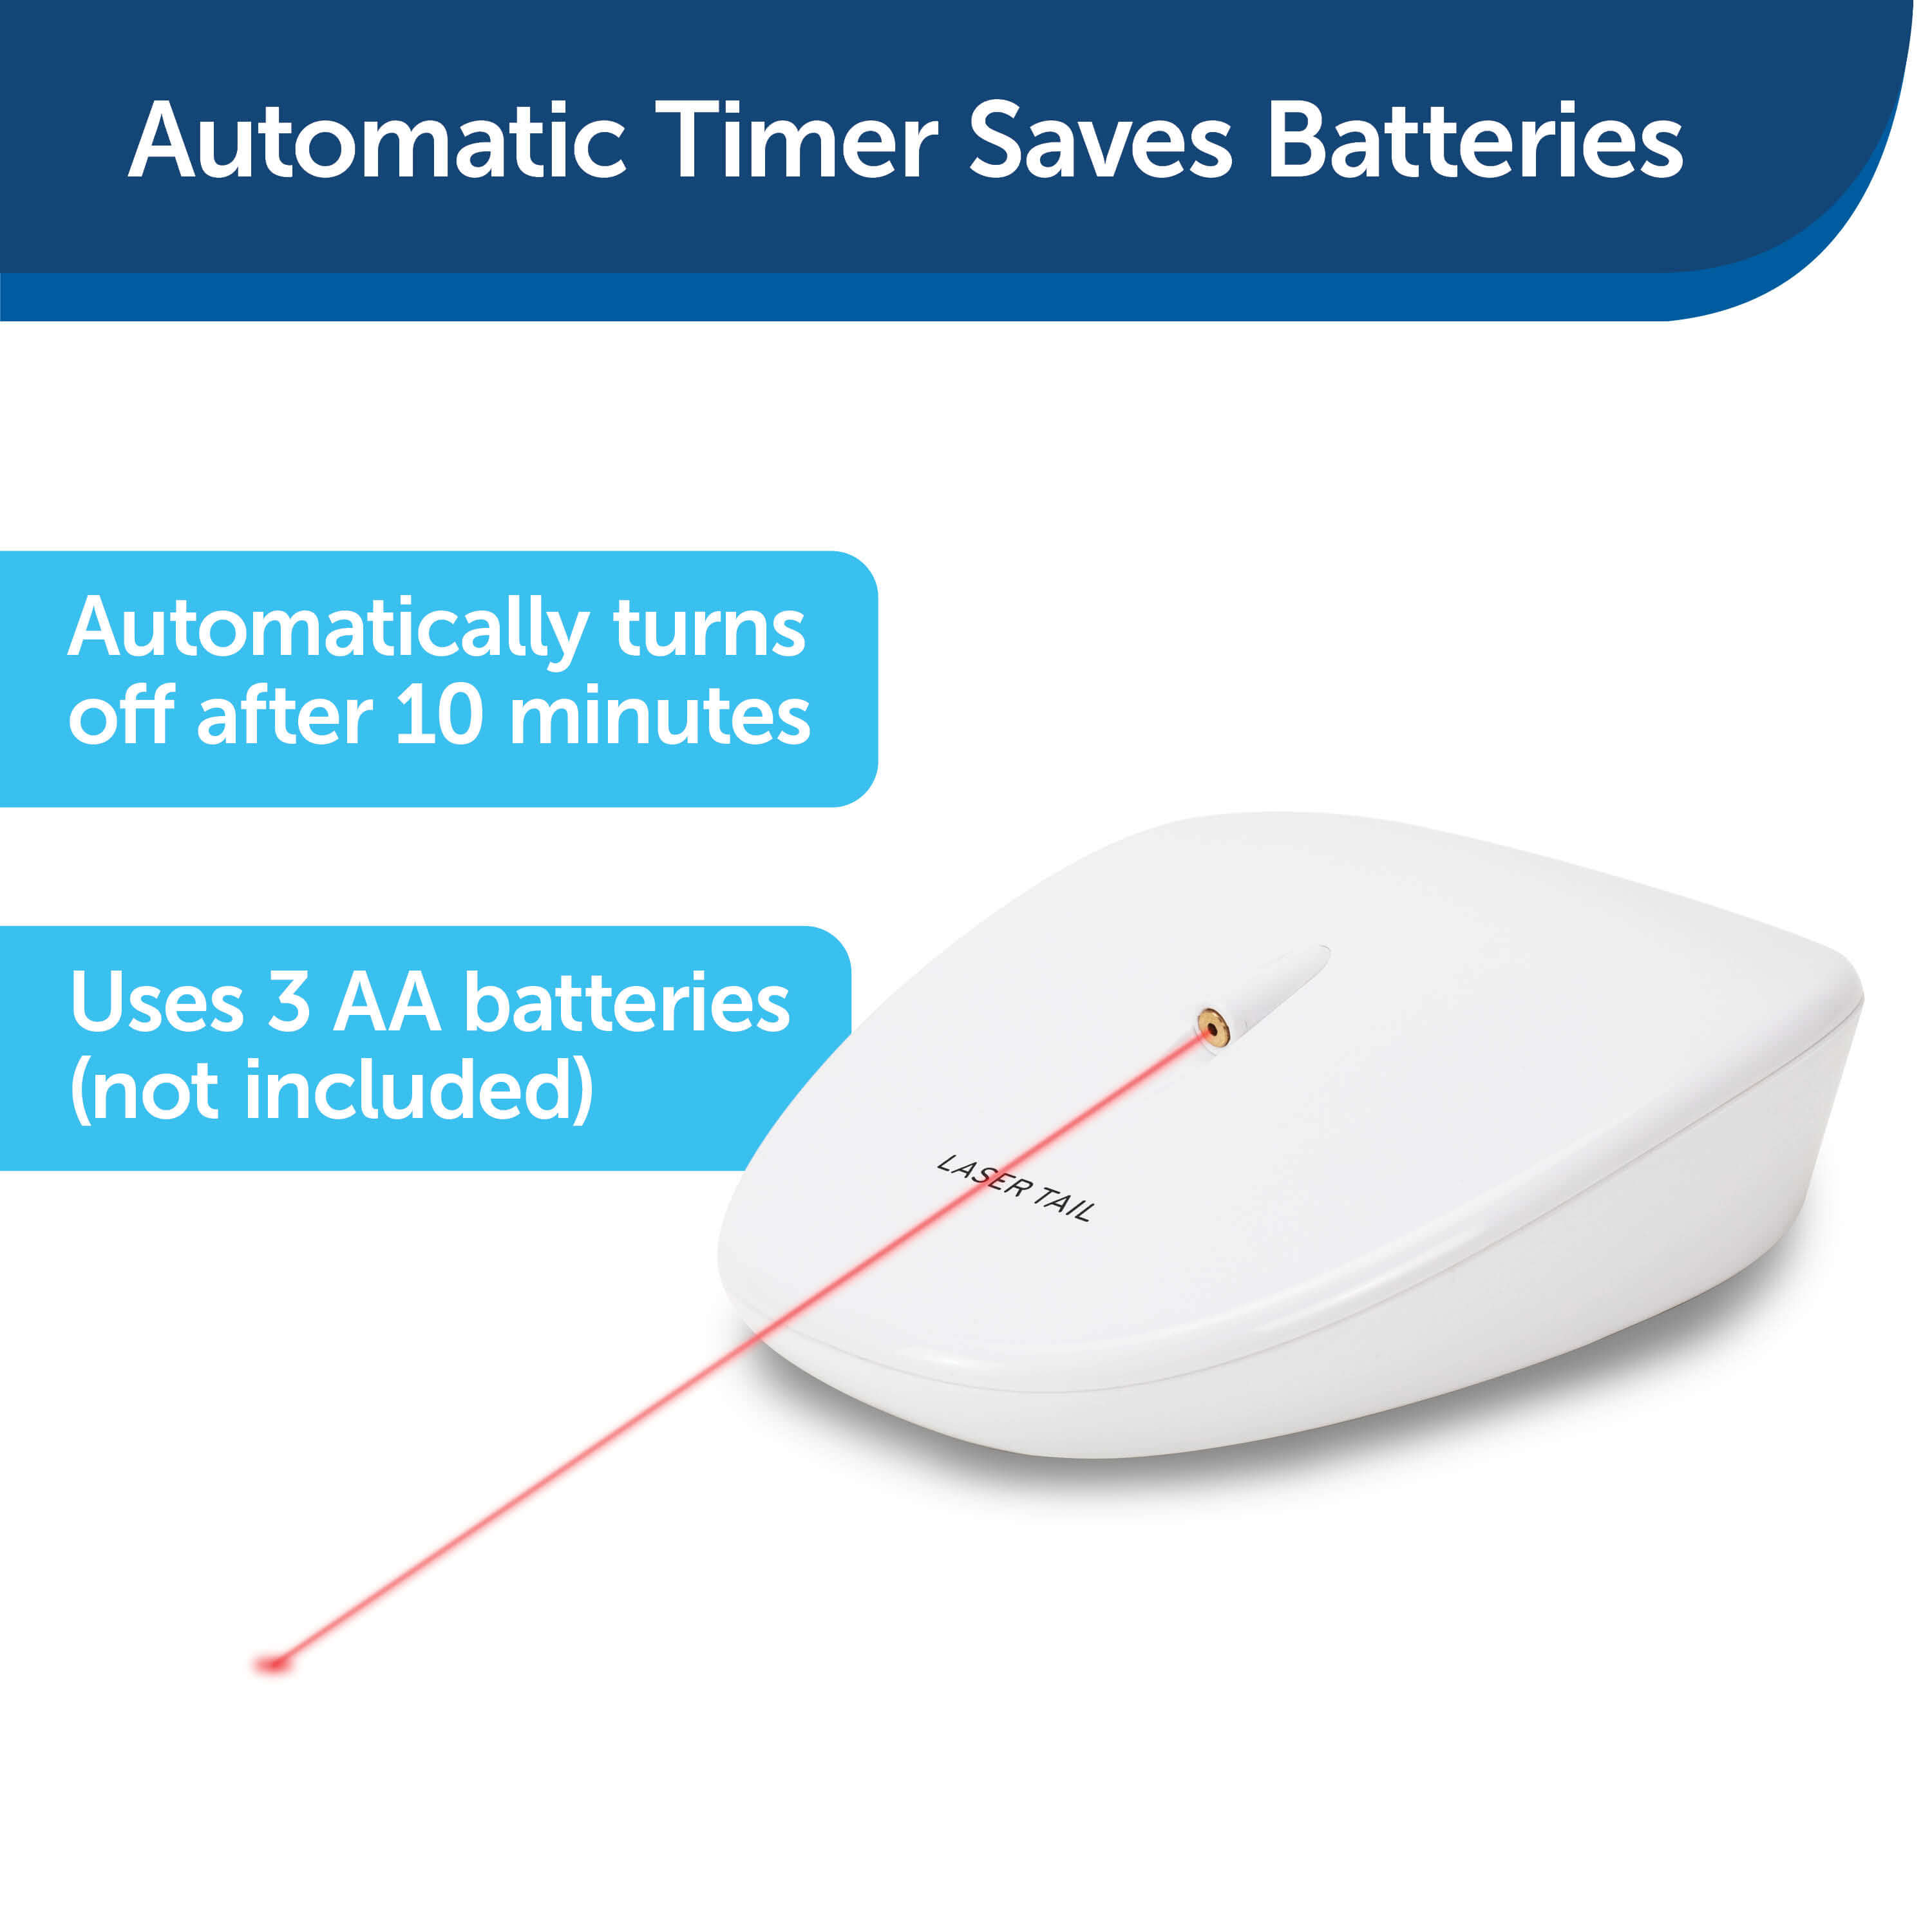 Automatic timer saves batteries